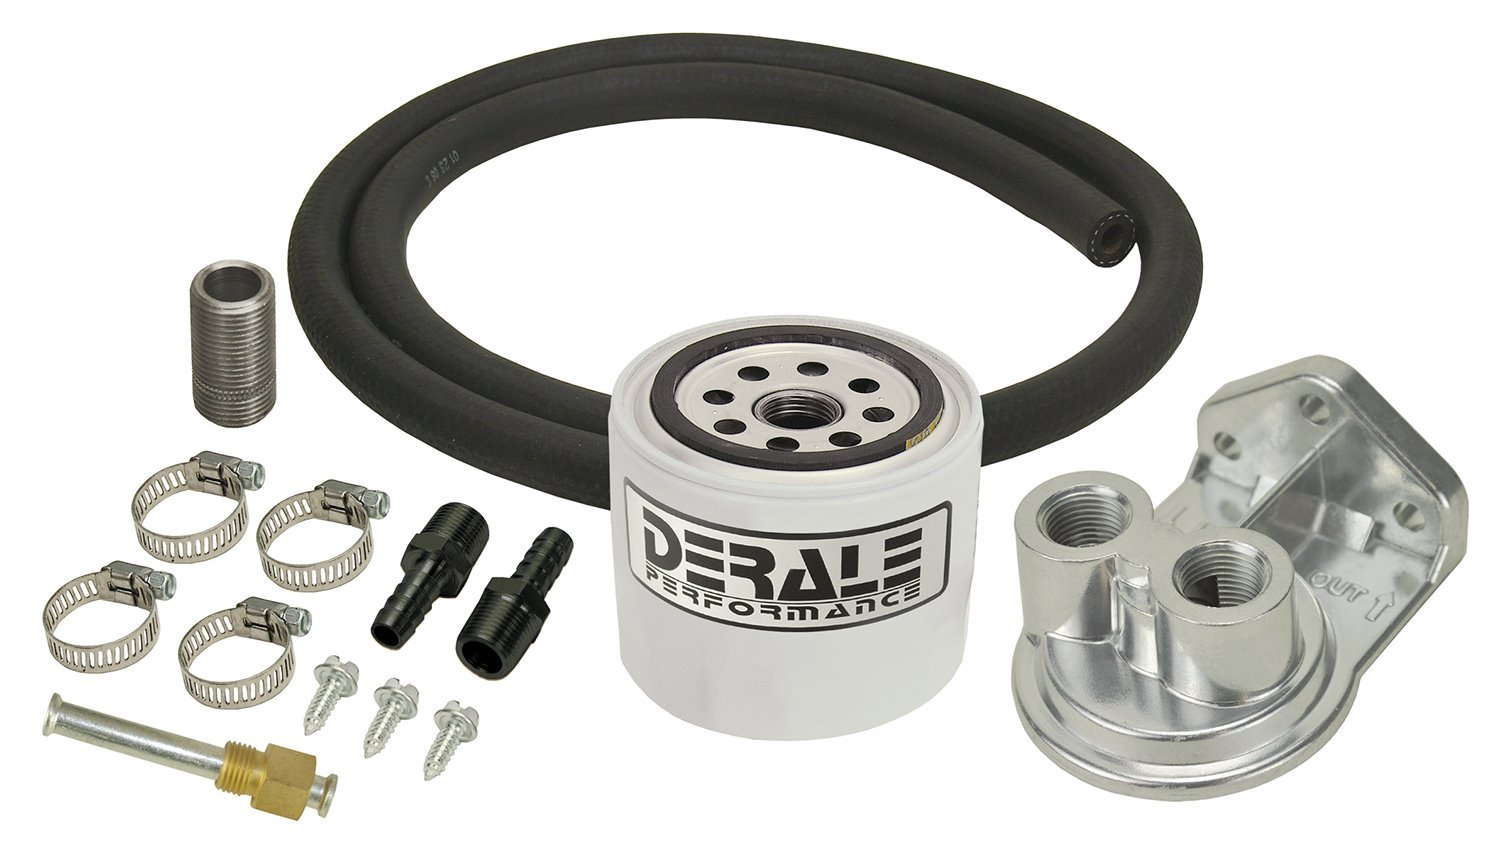 Standard Automatic Transmission Filter Kit Includes: Remote